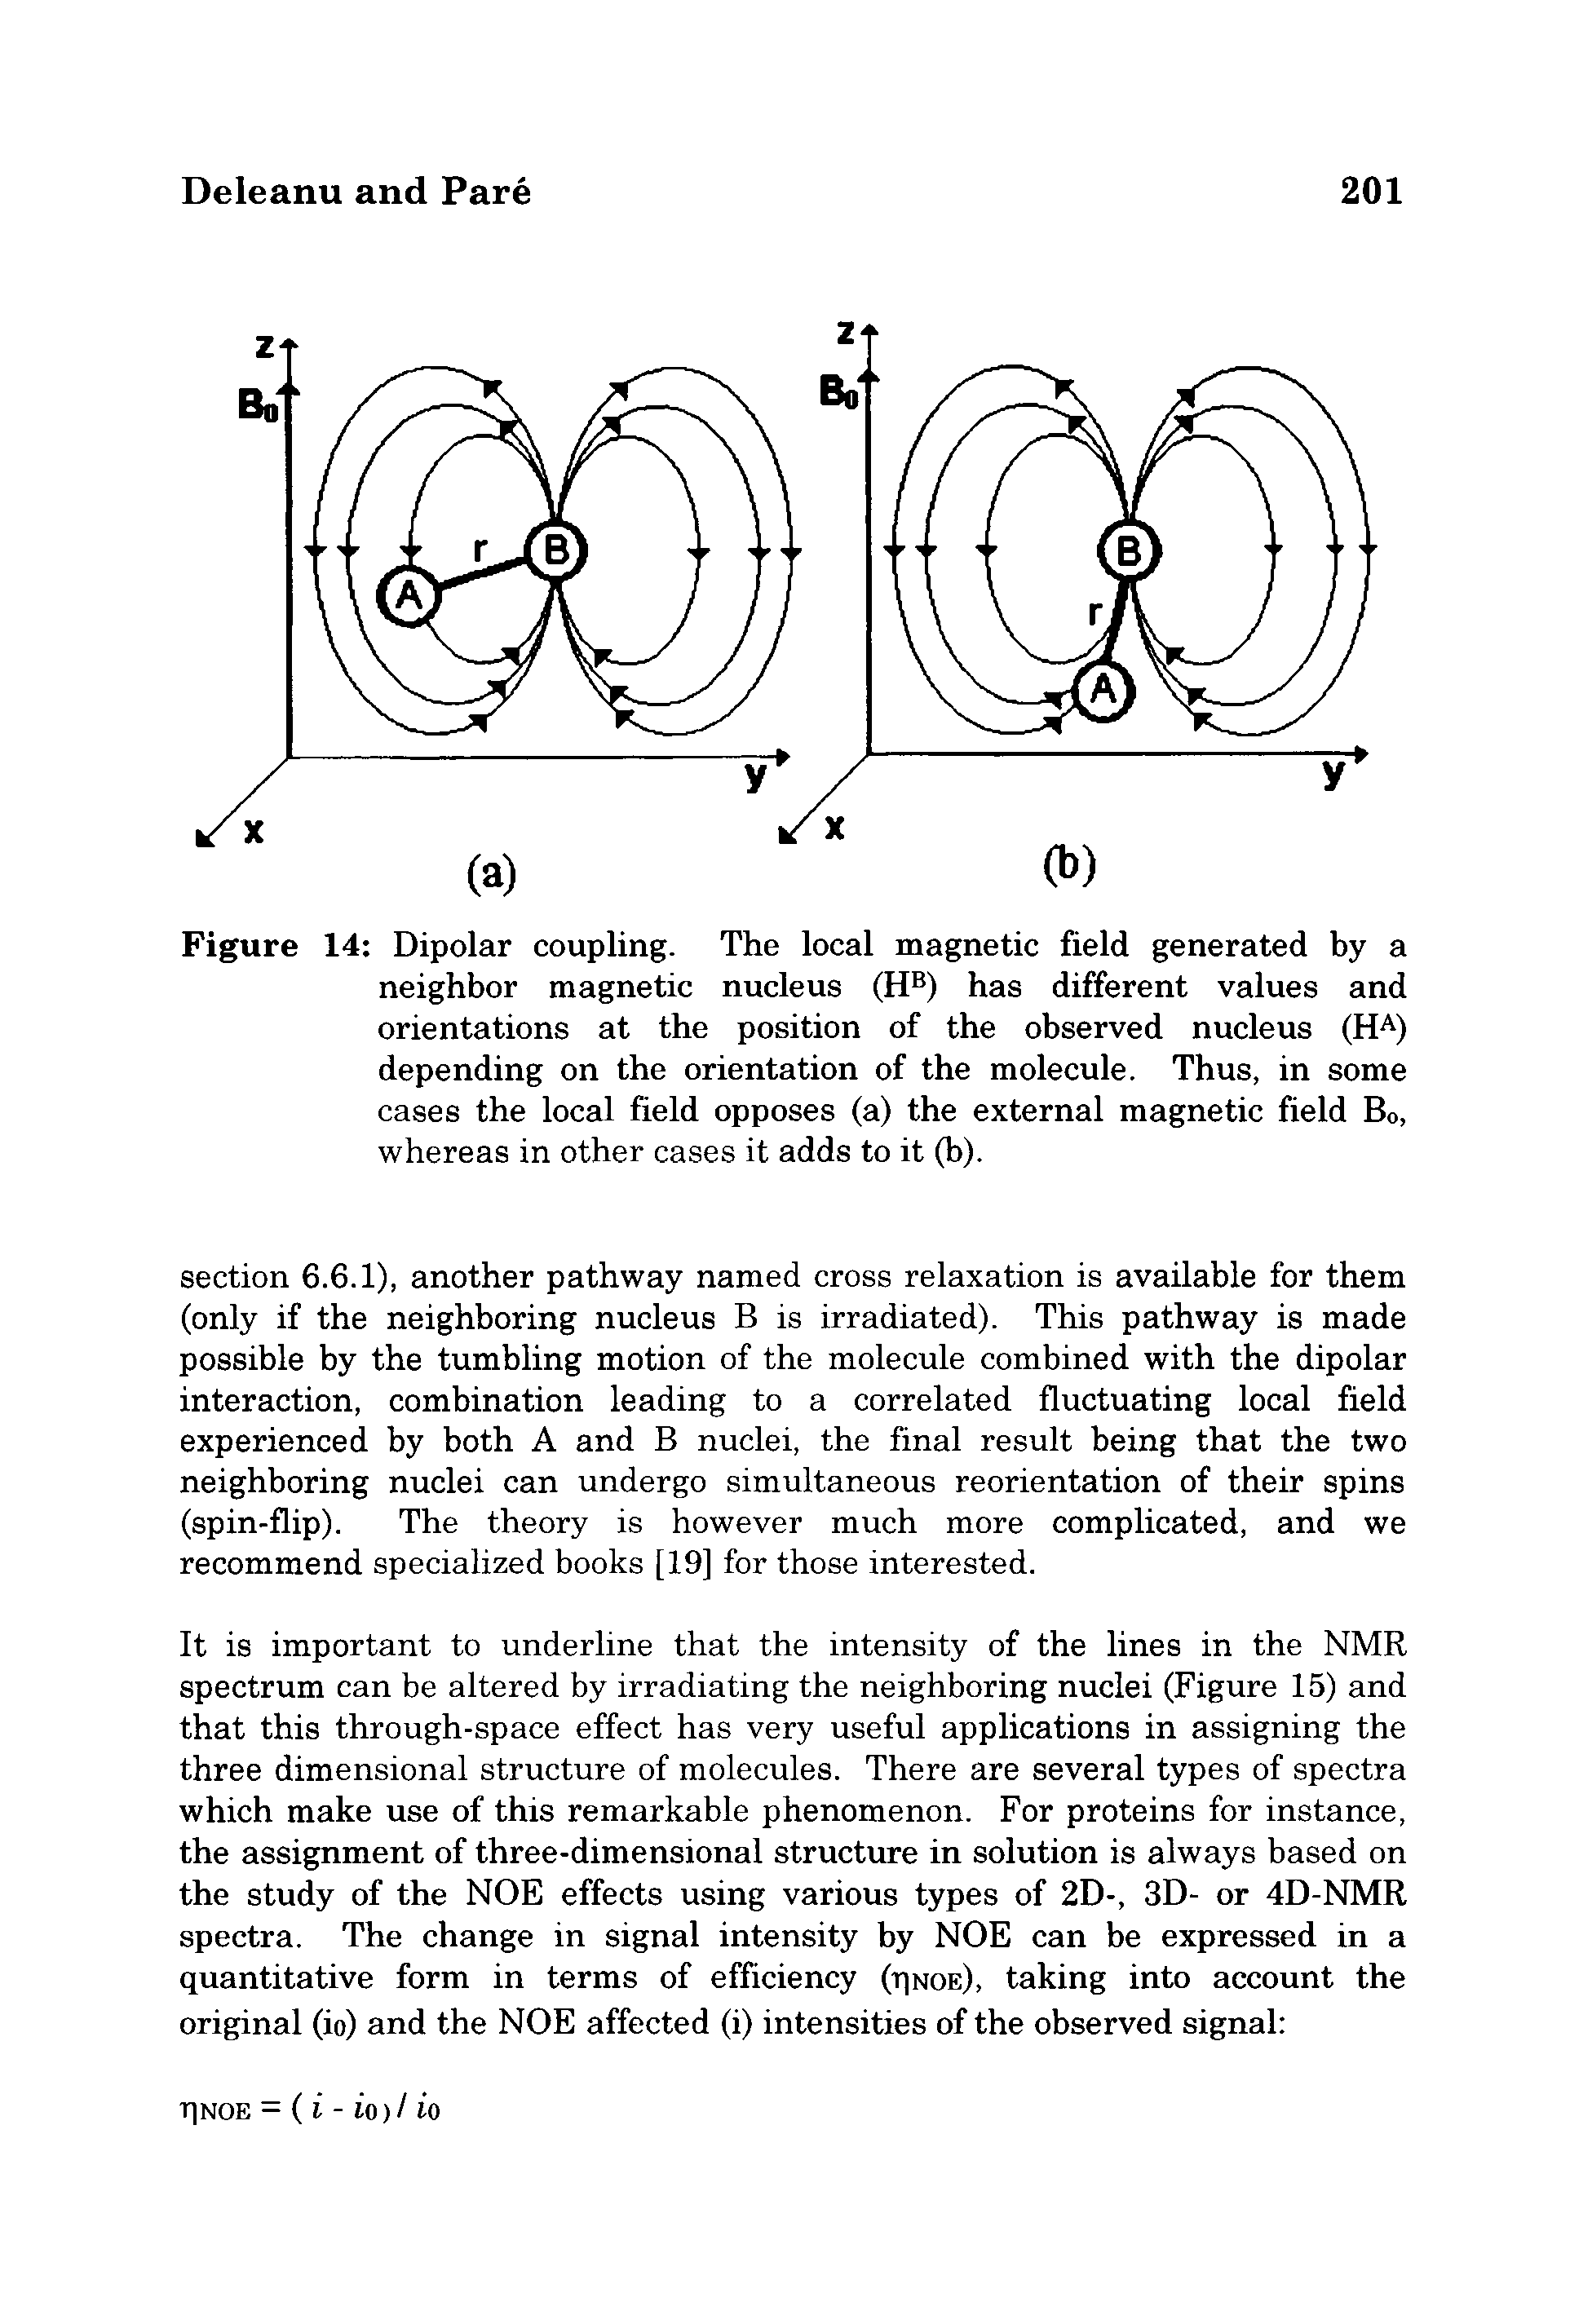 Figure 14 Dipolar coupling. The local magnetic field generated by a neighbor magnetic nucleus (H ) has different values and orientations at the position of the observed nucleus (H ) depending on the orientation of the molecule. Thus, in some cases the local field opposes (a) the external magnetic field Bo, whereas in other cases it adds to it (b).